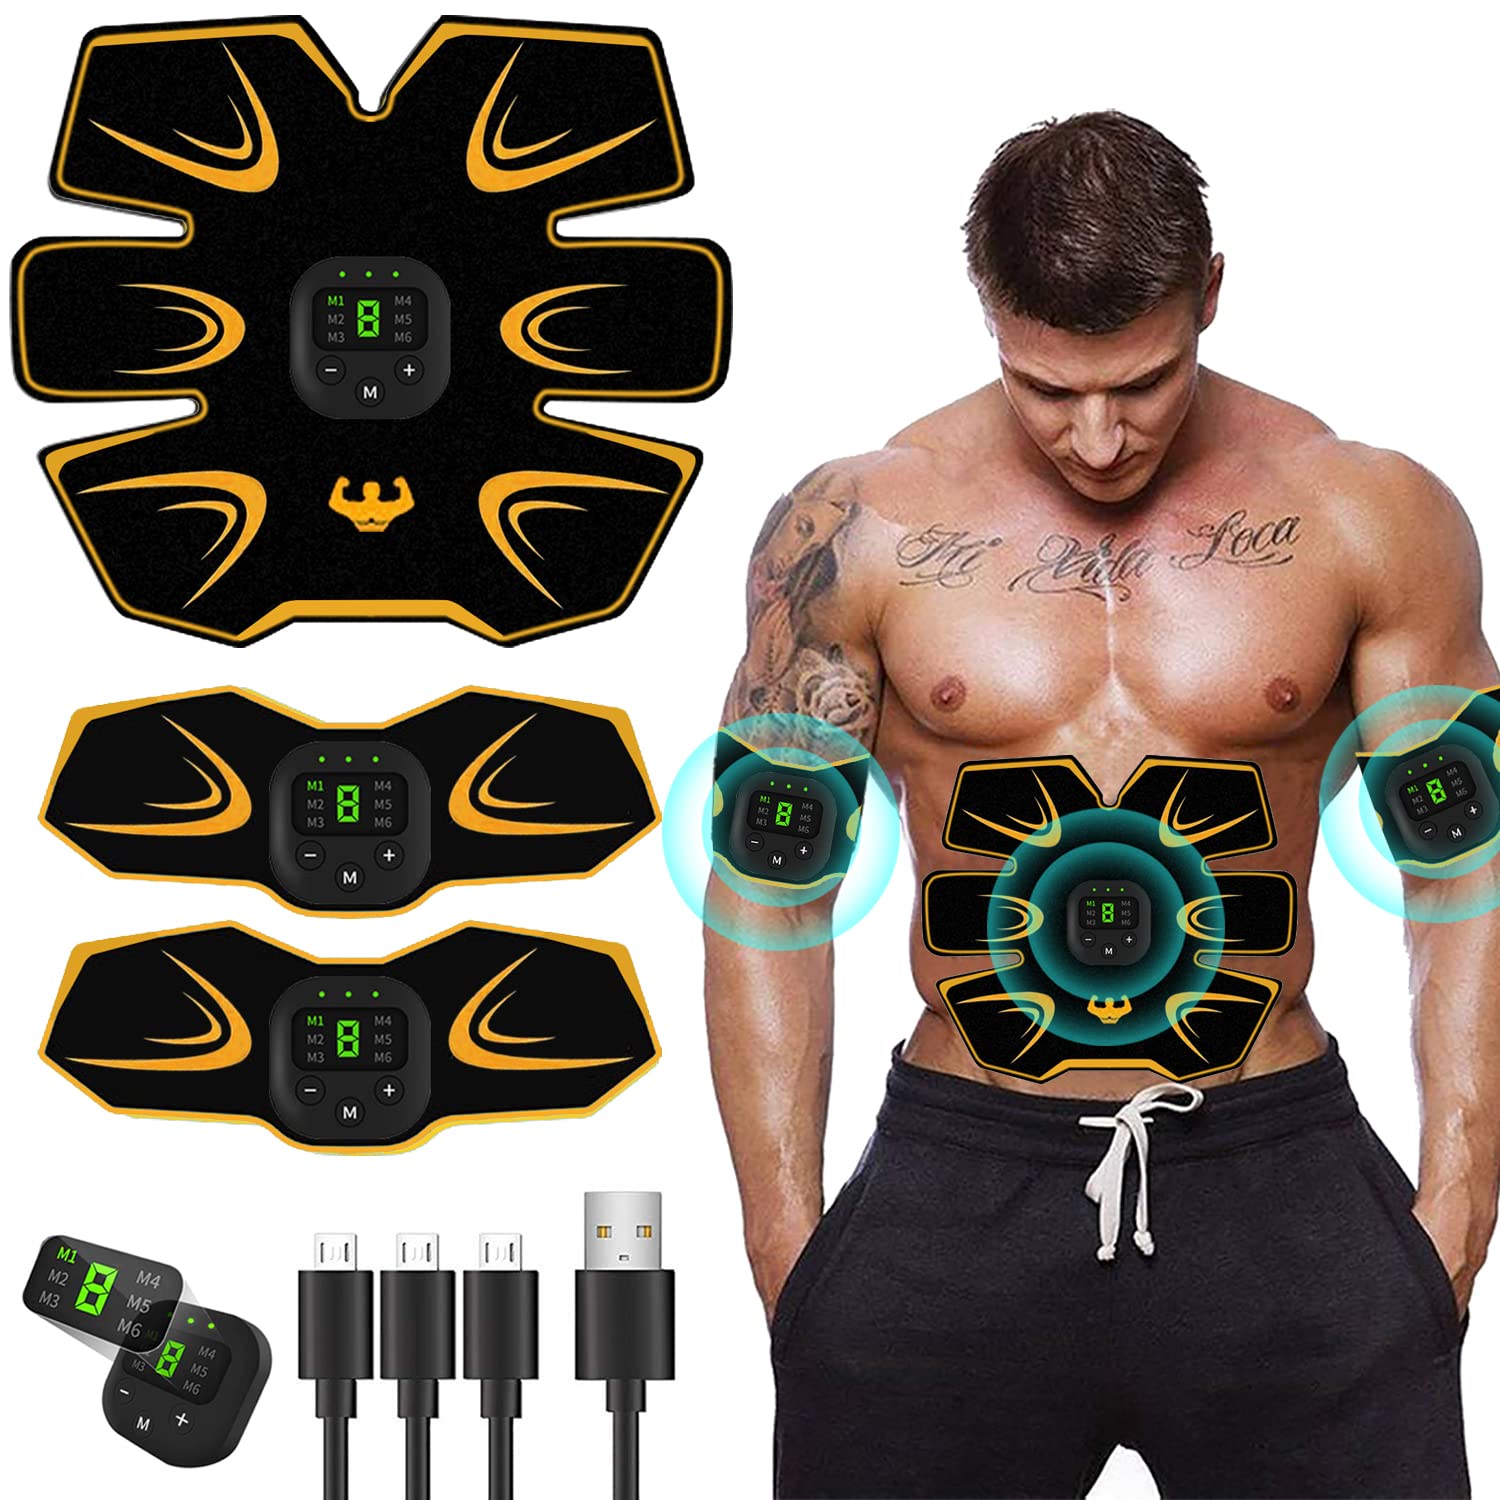 Abs Stimulator Ab Stimulator Muscle Toner Abs Muscle Trainer Ultimate Abs  Stimulator for Men Women Abdominal Work Out Ads Power Fitness Abs Muscle Training  Gear ABS Workout Equipment Portable